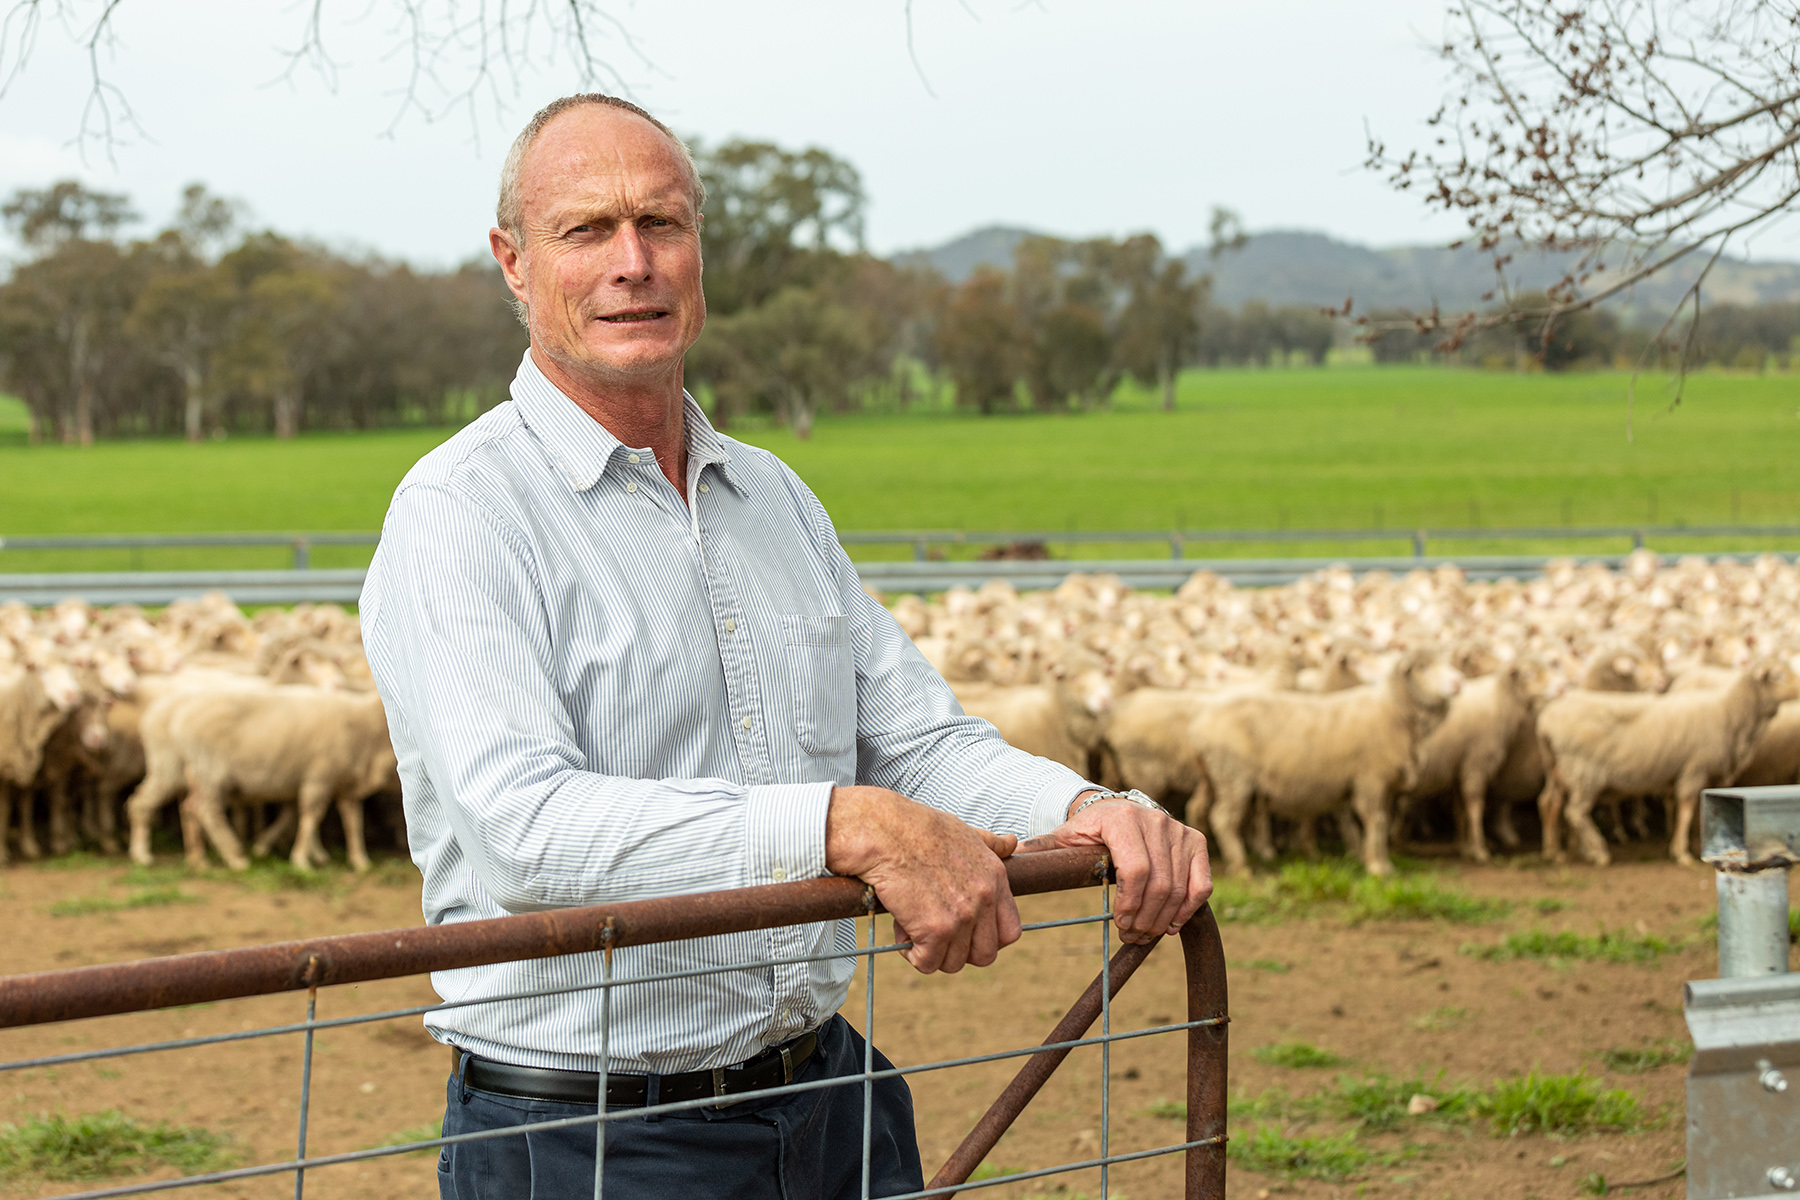 Incoming chair of the NSW Footrot Steering Committee Derek Schoen, aims to improve footrot management outcomes in sheep flocks across the state